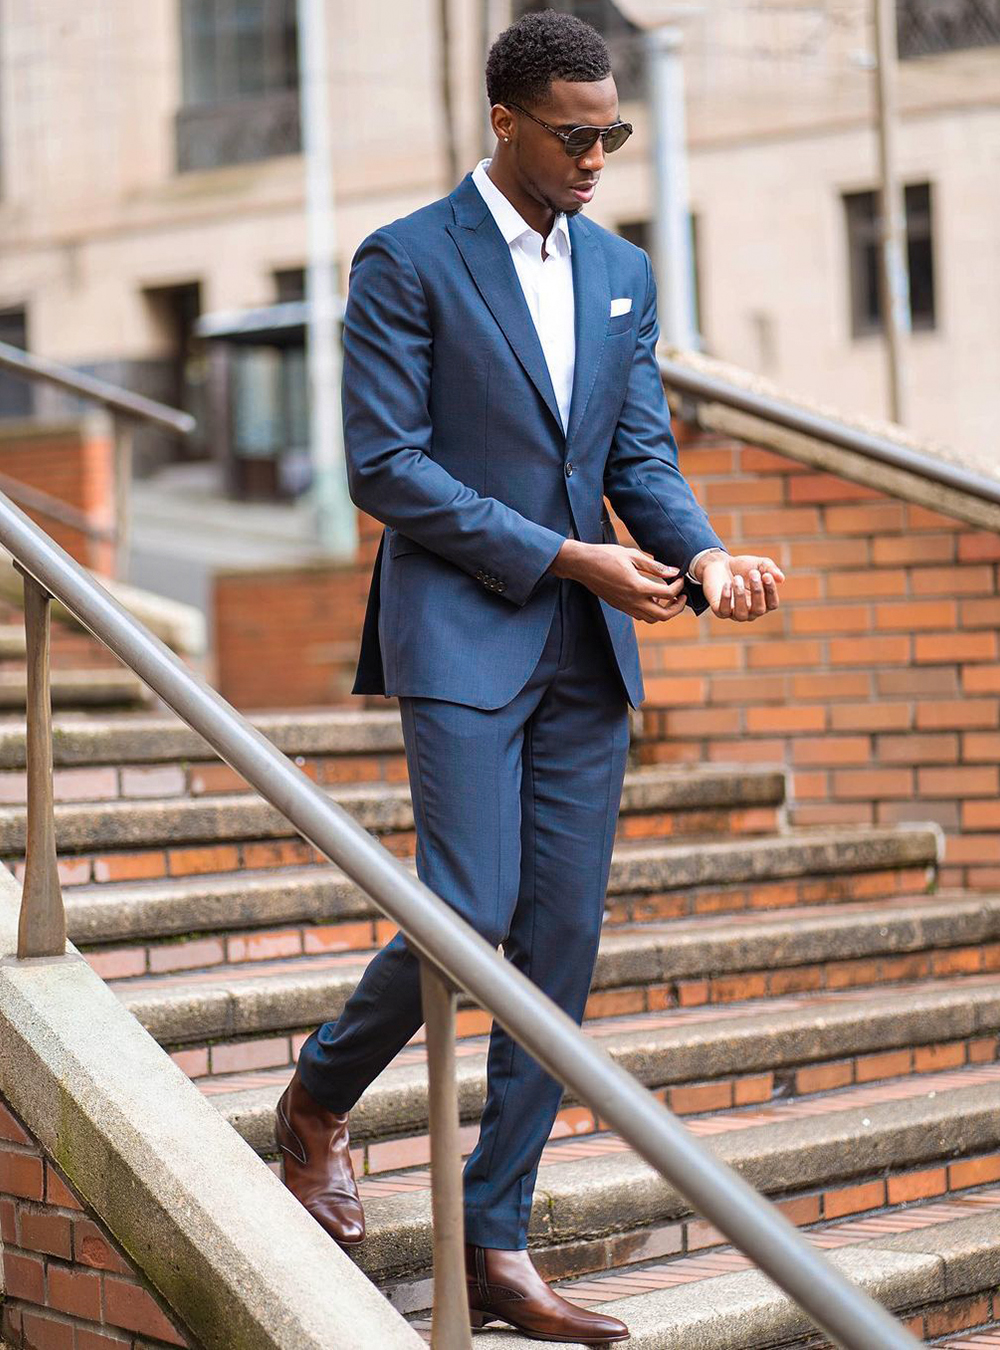 Stylish Ways to Wear Chelsea Boots with a Suit - Suits Expert